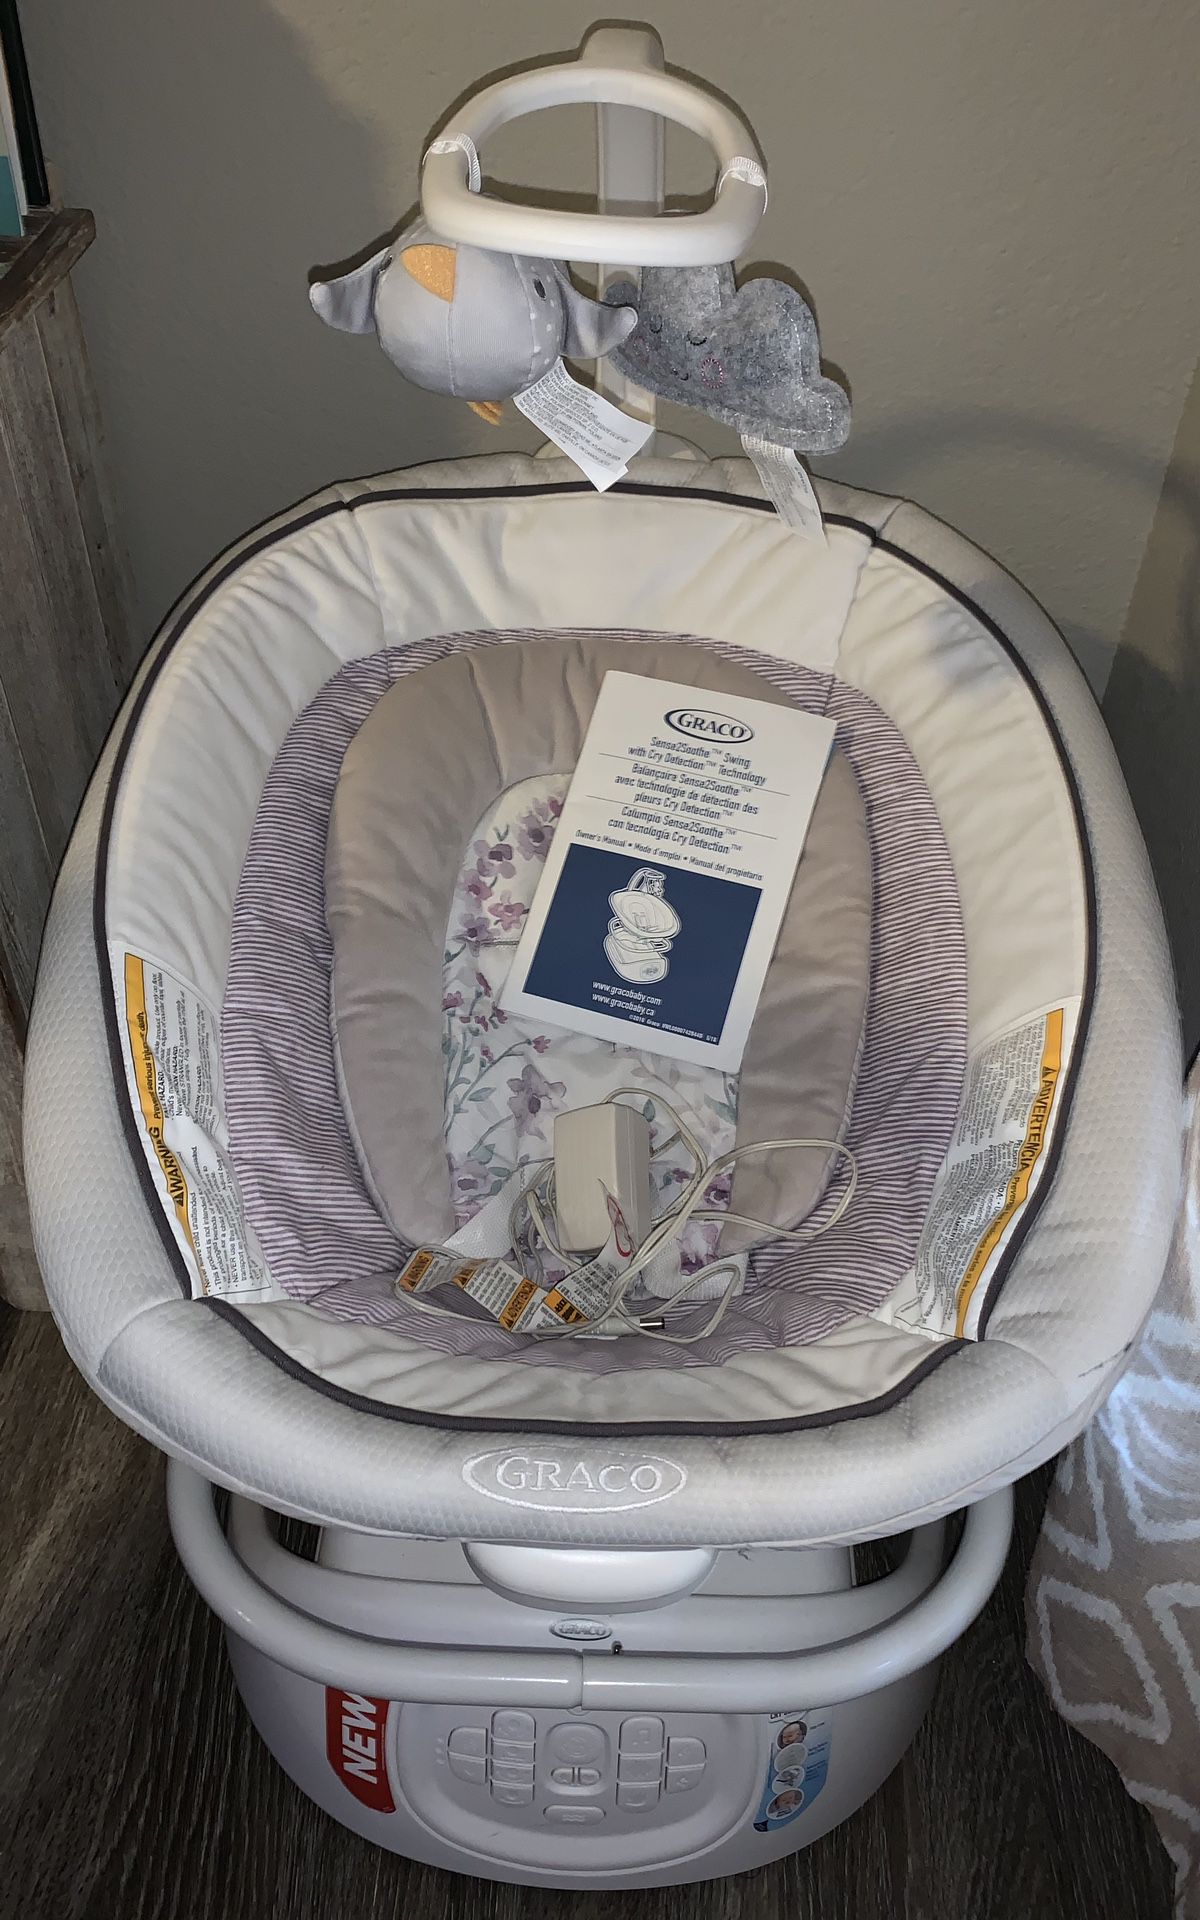 Baby Swing with Cry detection technology